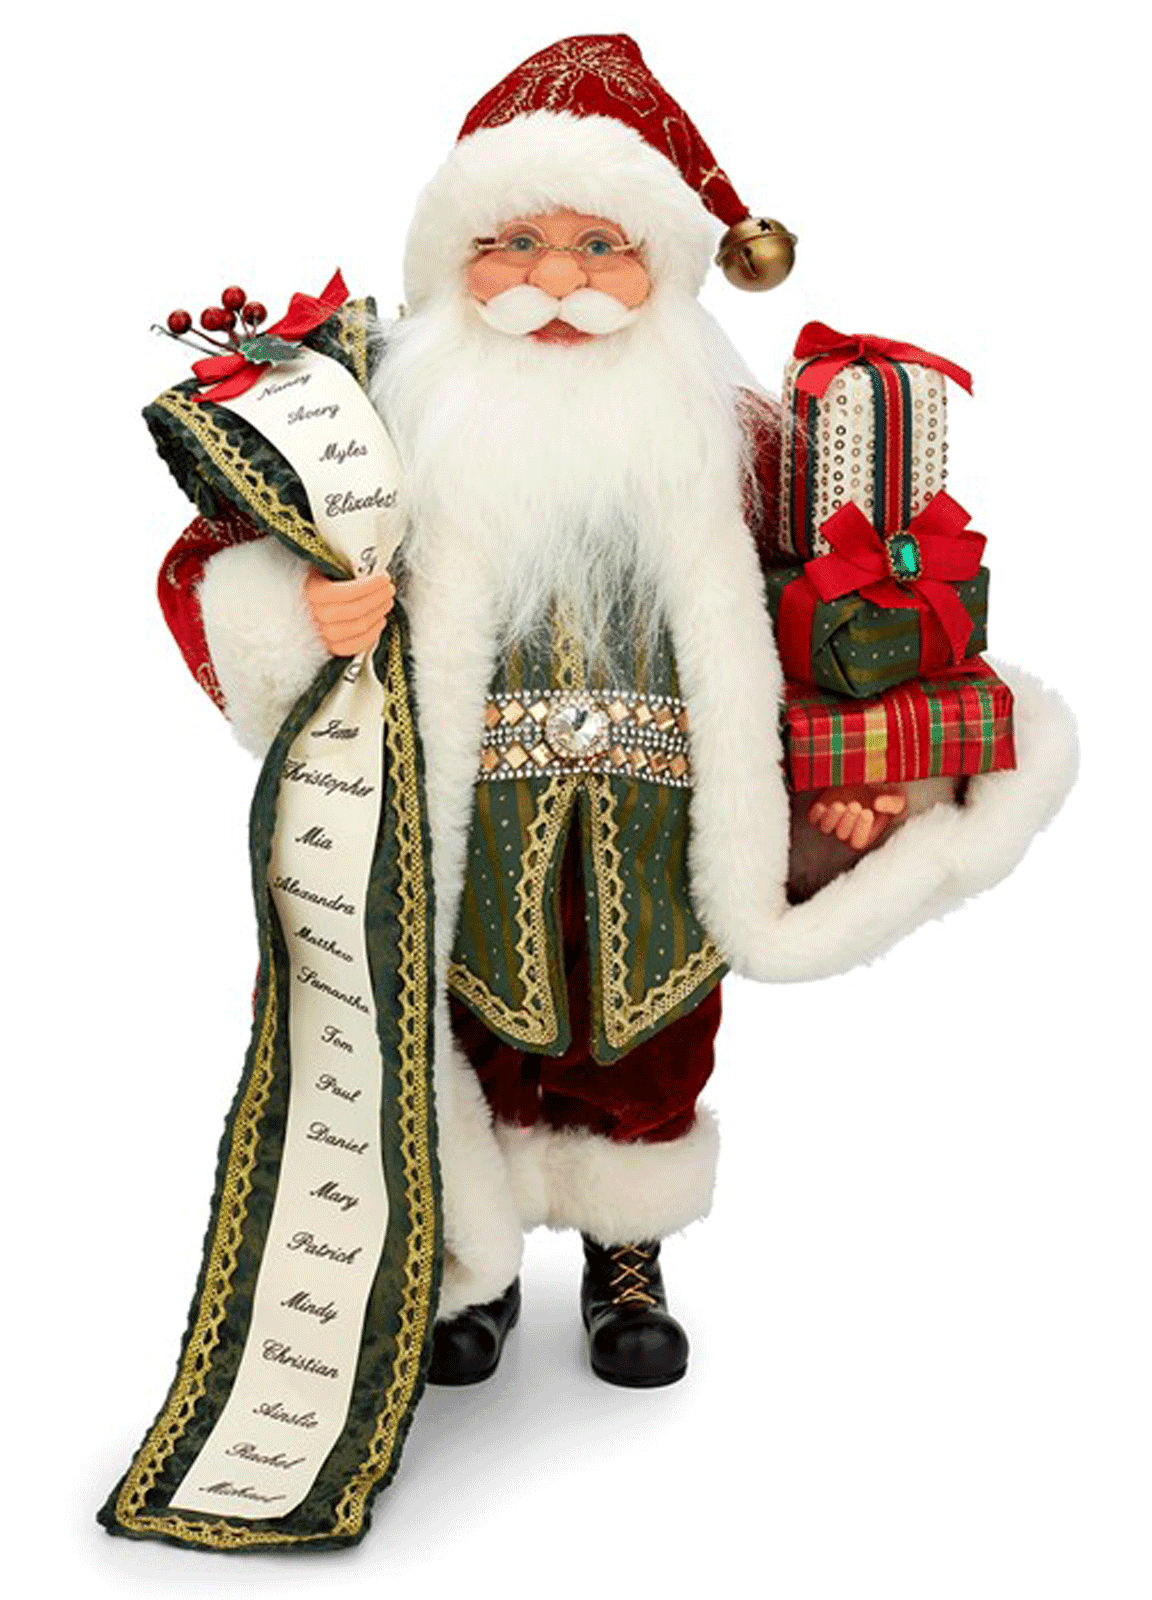 Santa with gifts salt and pepper shakers Christmas salt and pepper shakers white and gold with holly and berries Holly Holiday shakers